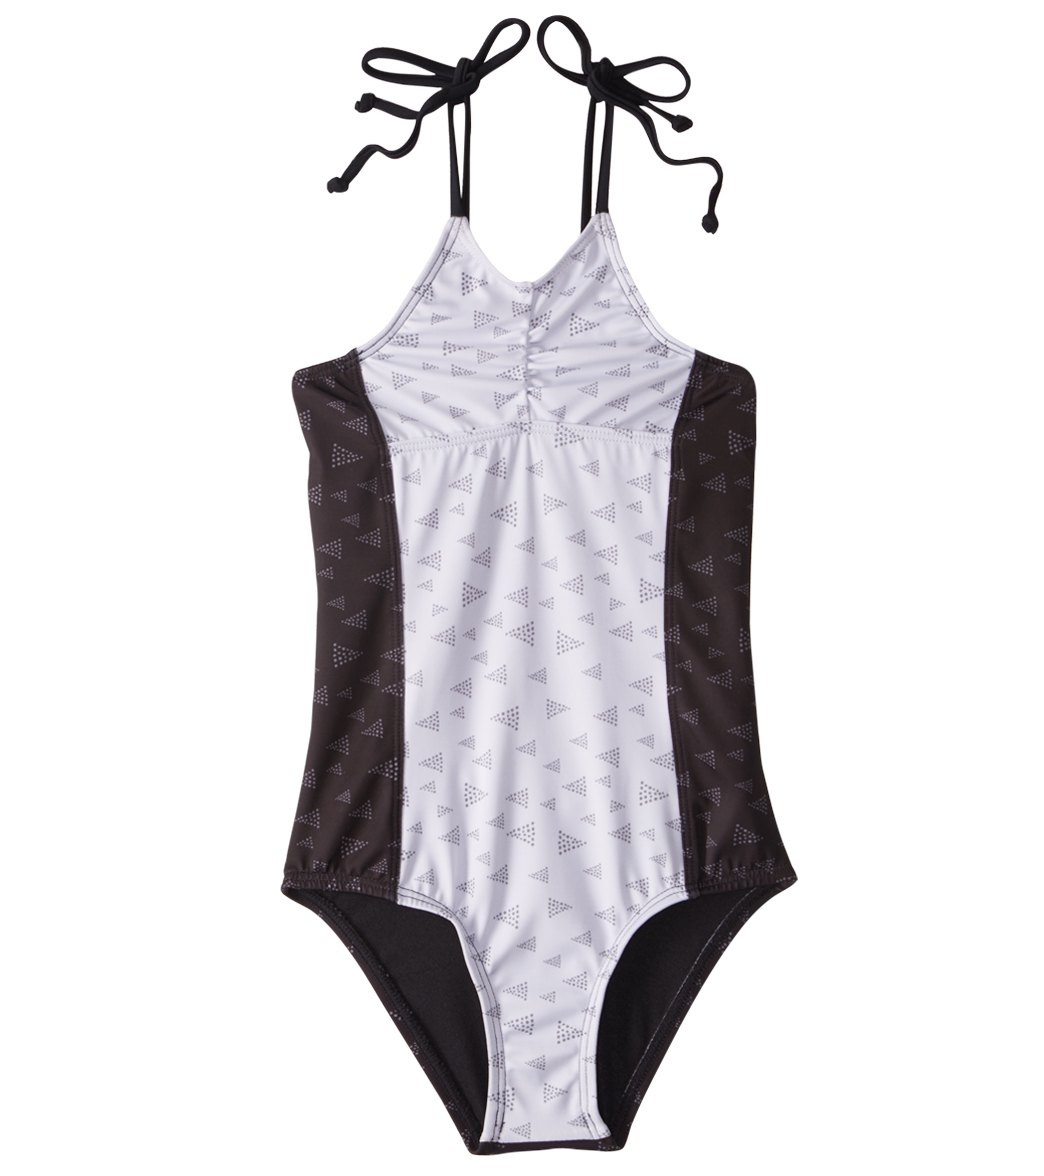 Reef Girls' Tonight's The Night One Piece Swimsuit 7-14 - Black 8 Polyester/Spandex - Swimoutlet.com